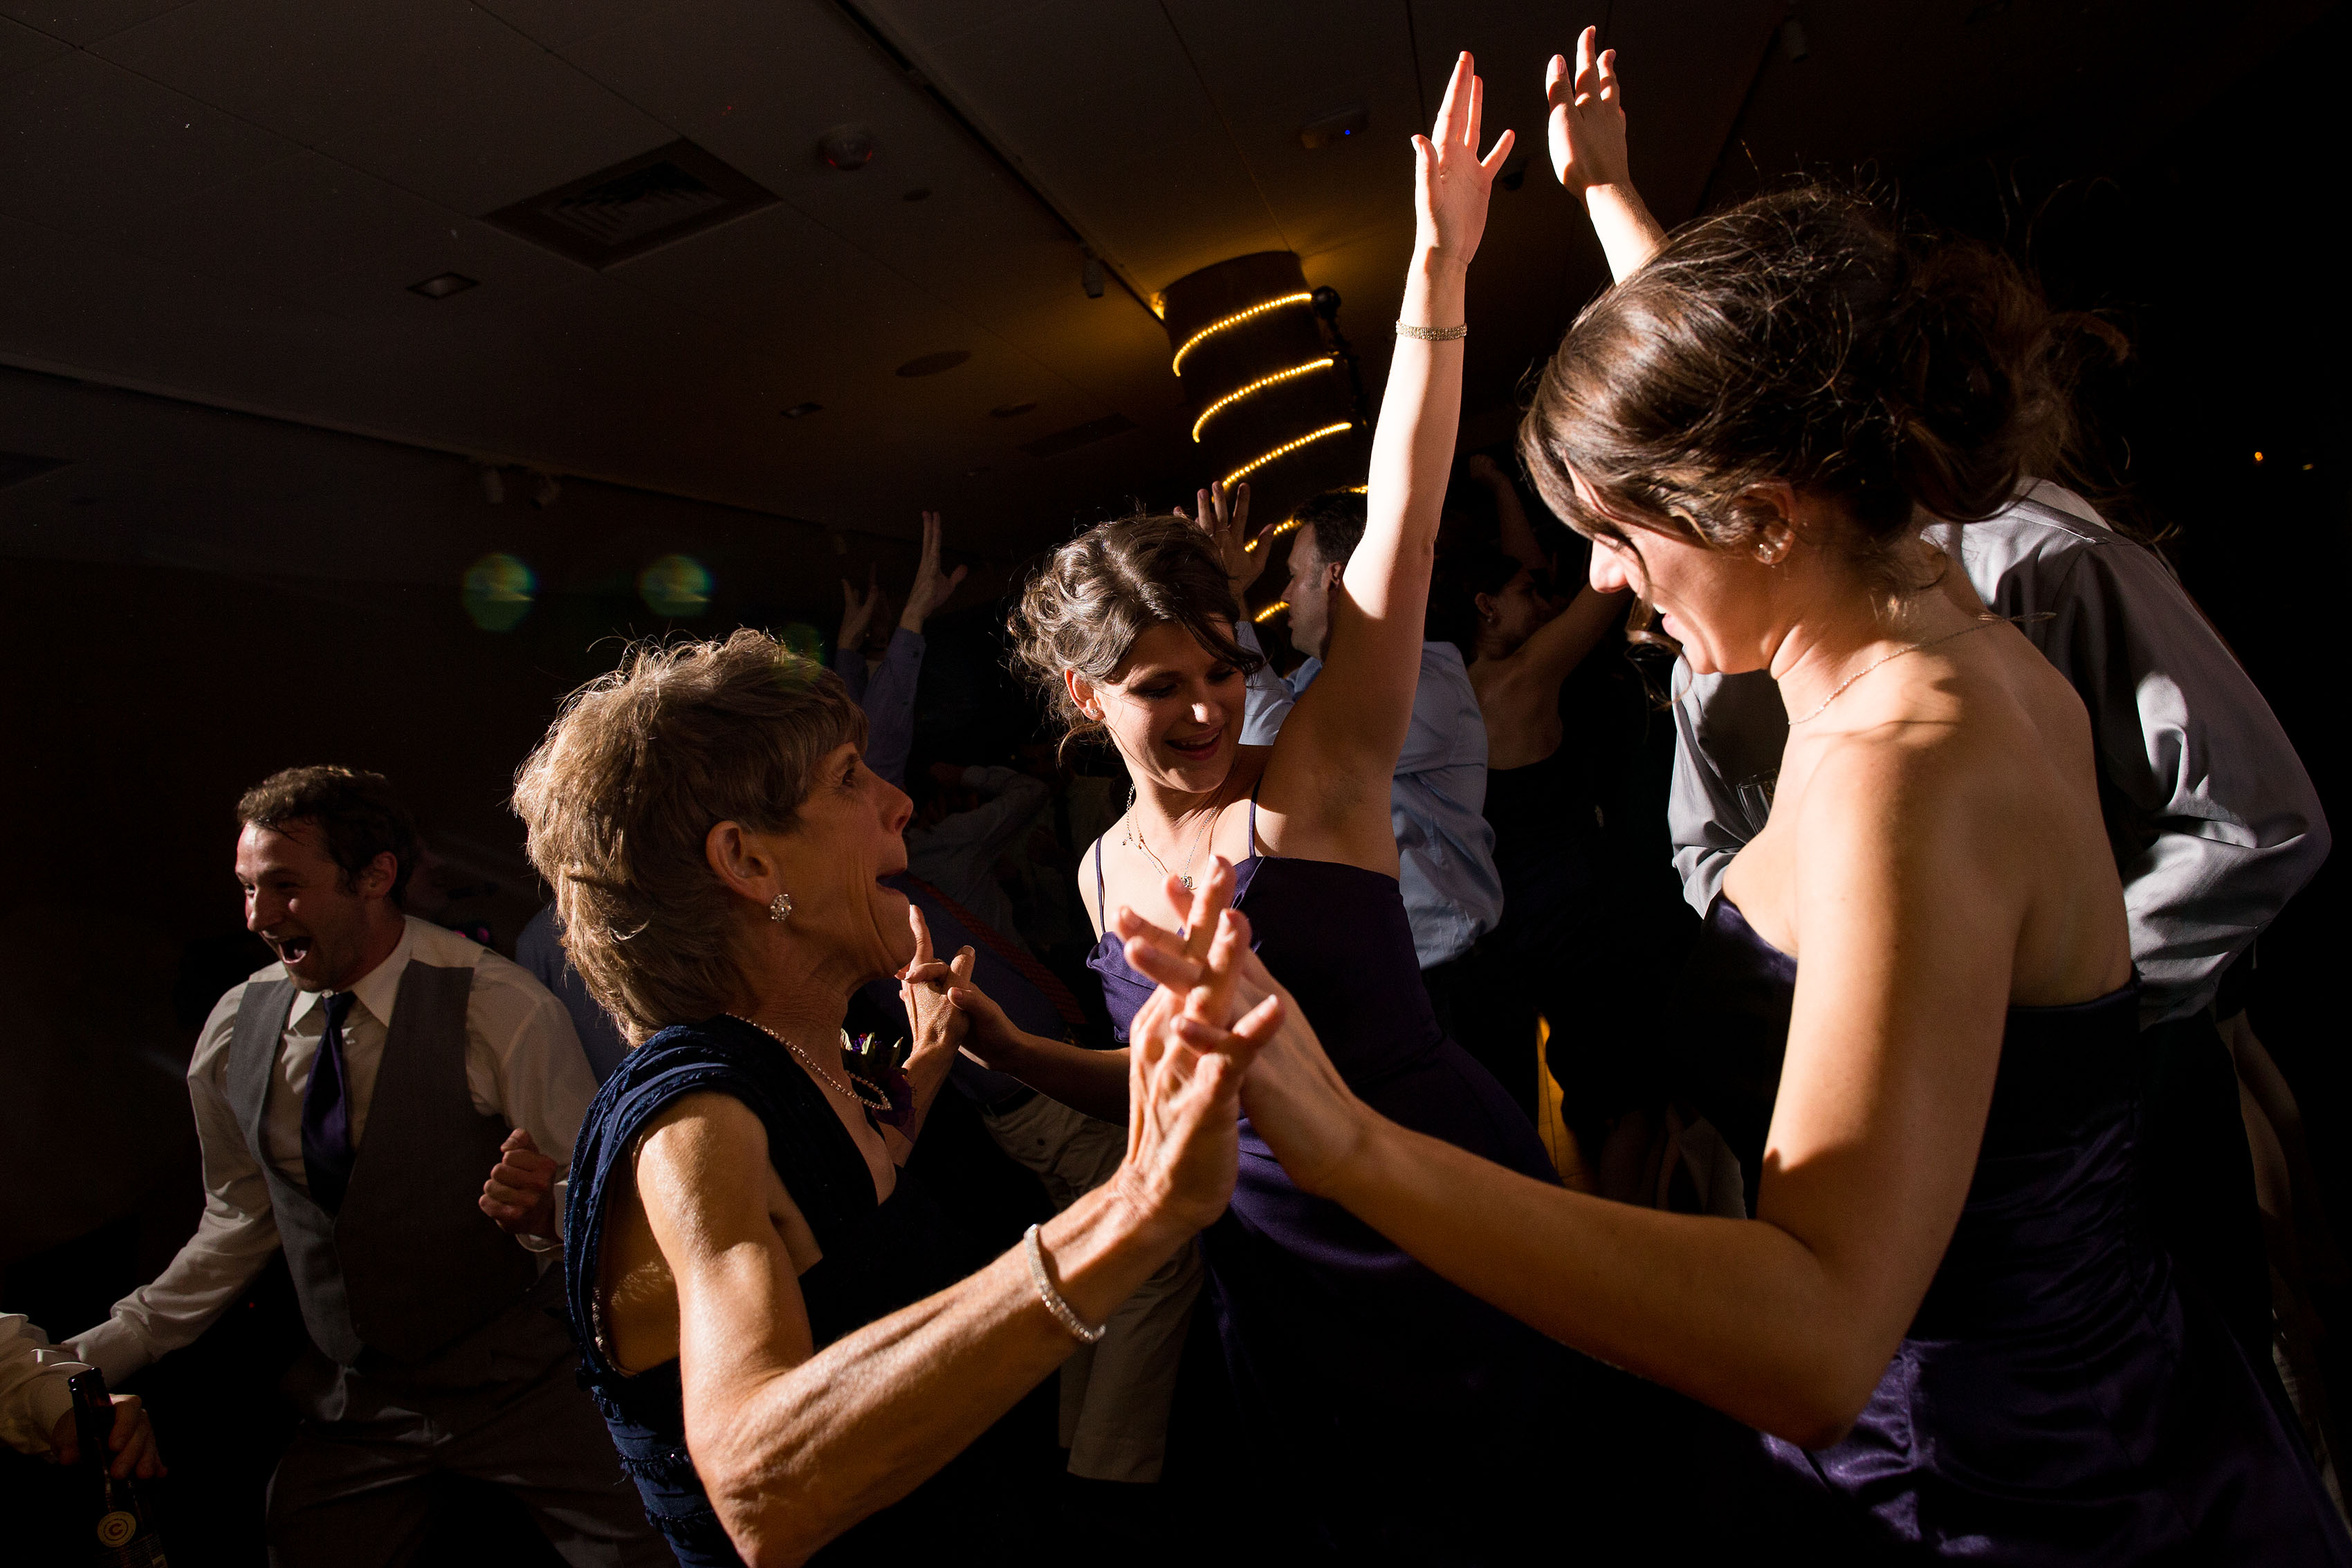 Guests dance together at the History Colorado Center during a wedding